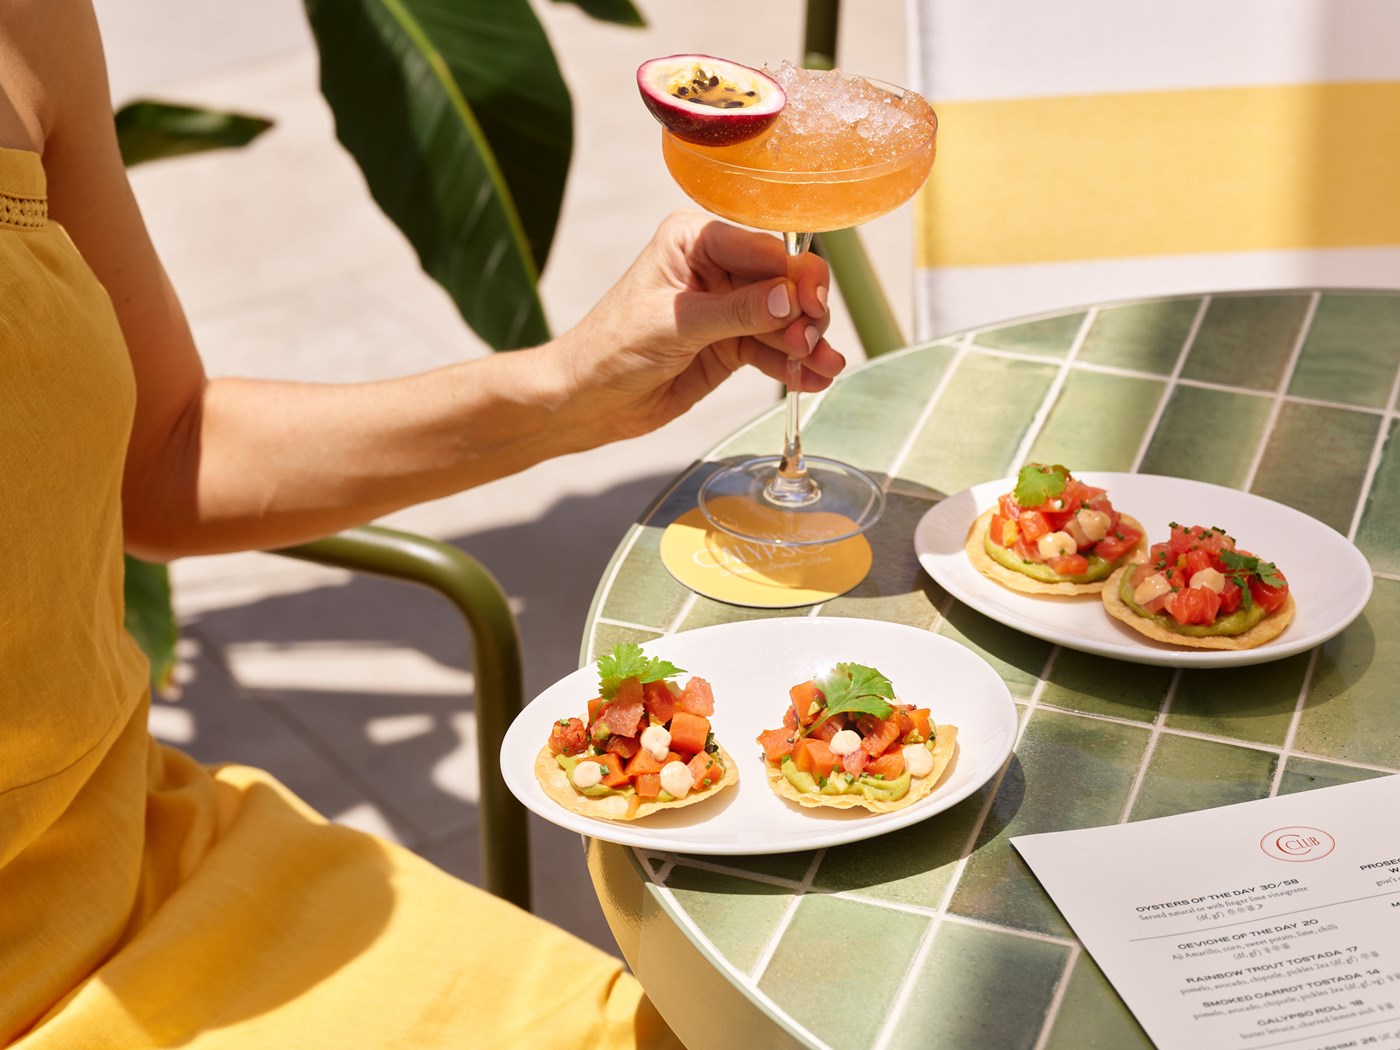 A person in a yellow dress holds a passionfruit cocktail, seated at a green tiled table with two plates of food.